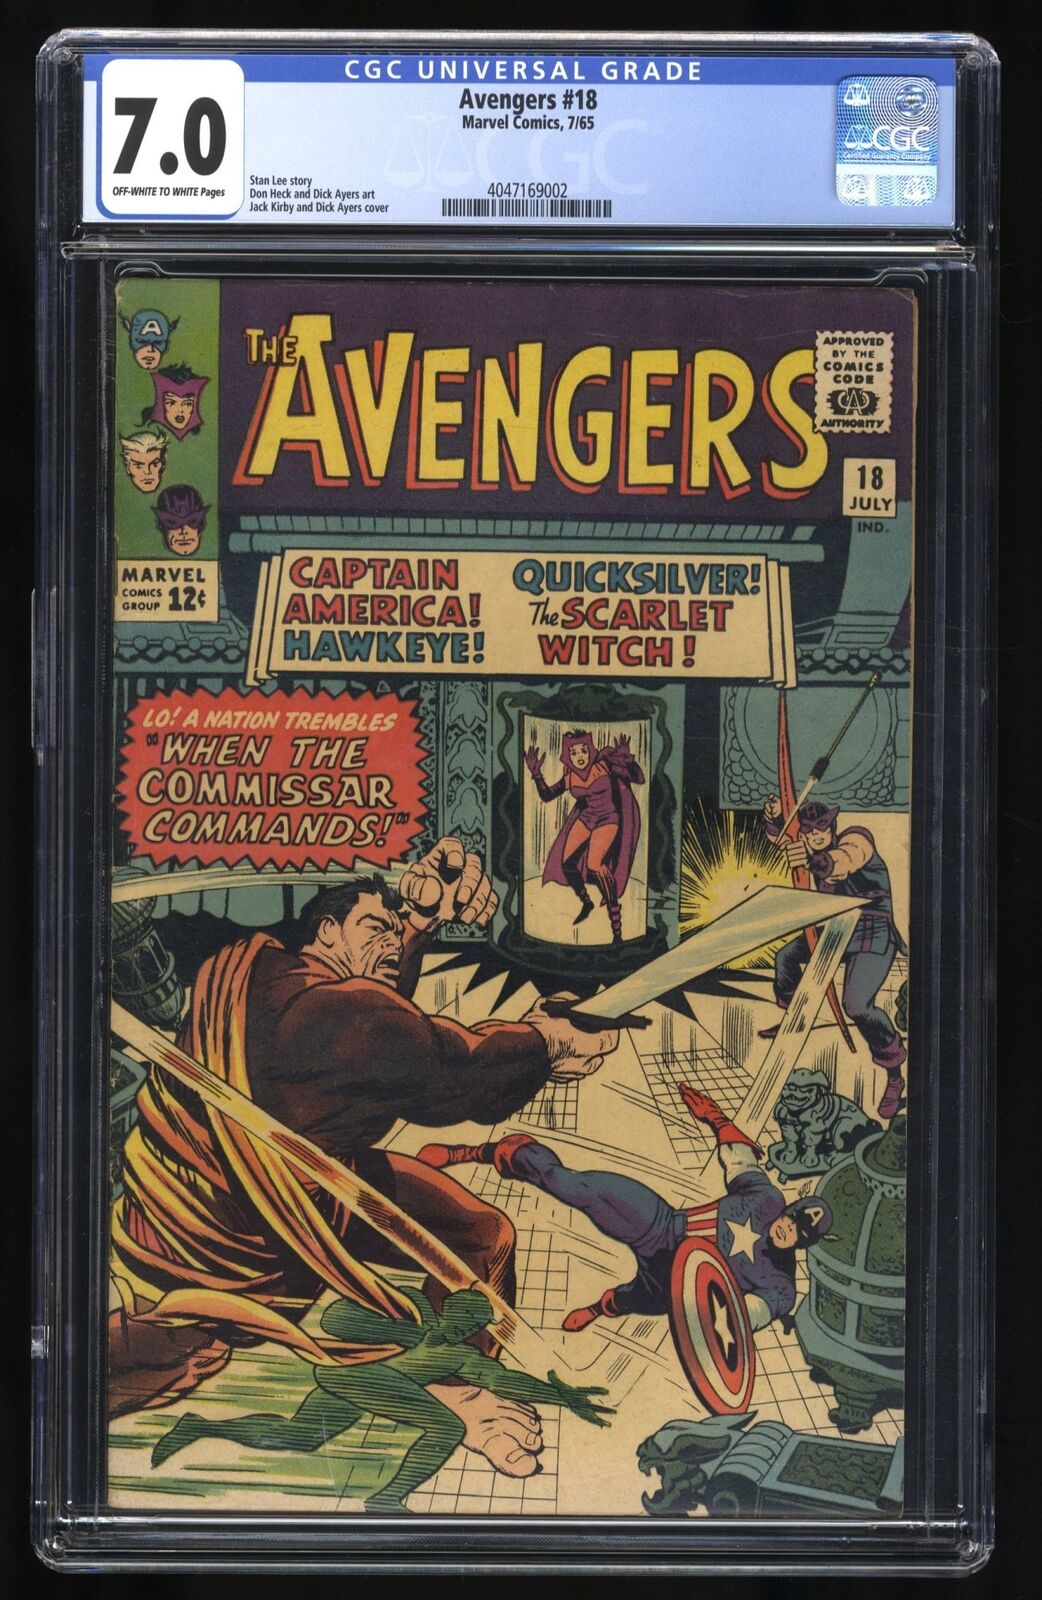 Avengers #18 CGC FN/VF 7.0 Jack Kirby Cover Stan Lee and Don Heck Marvel 1965